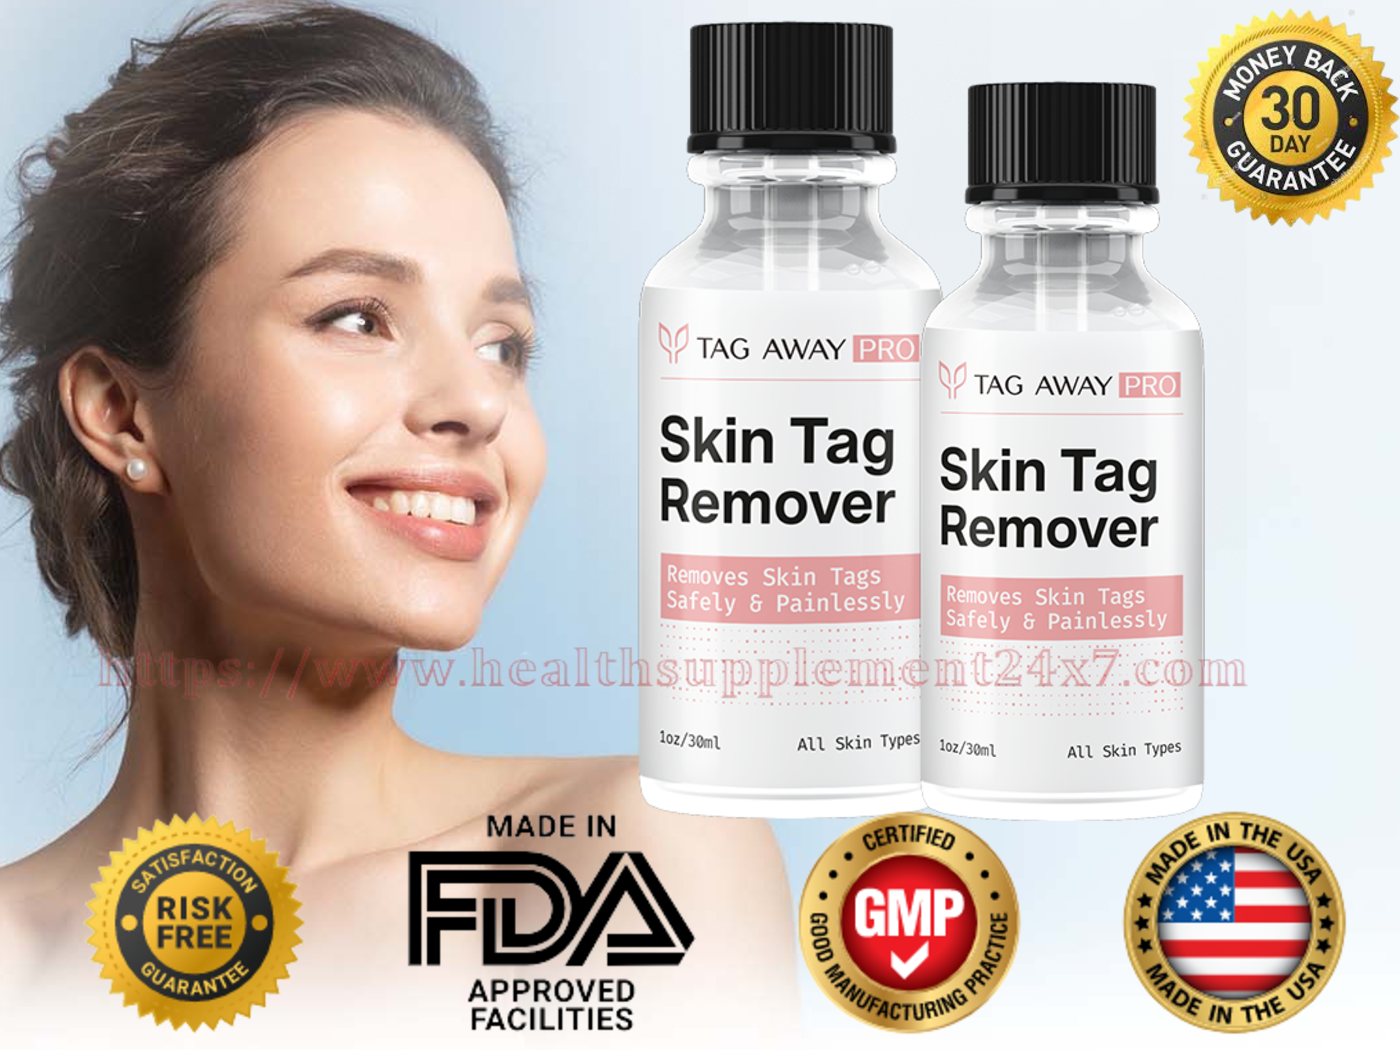 Tag away pro skin tag remover 6